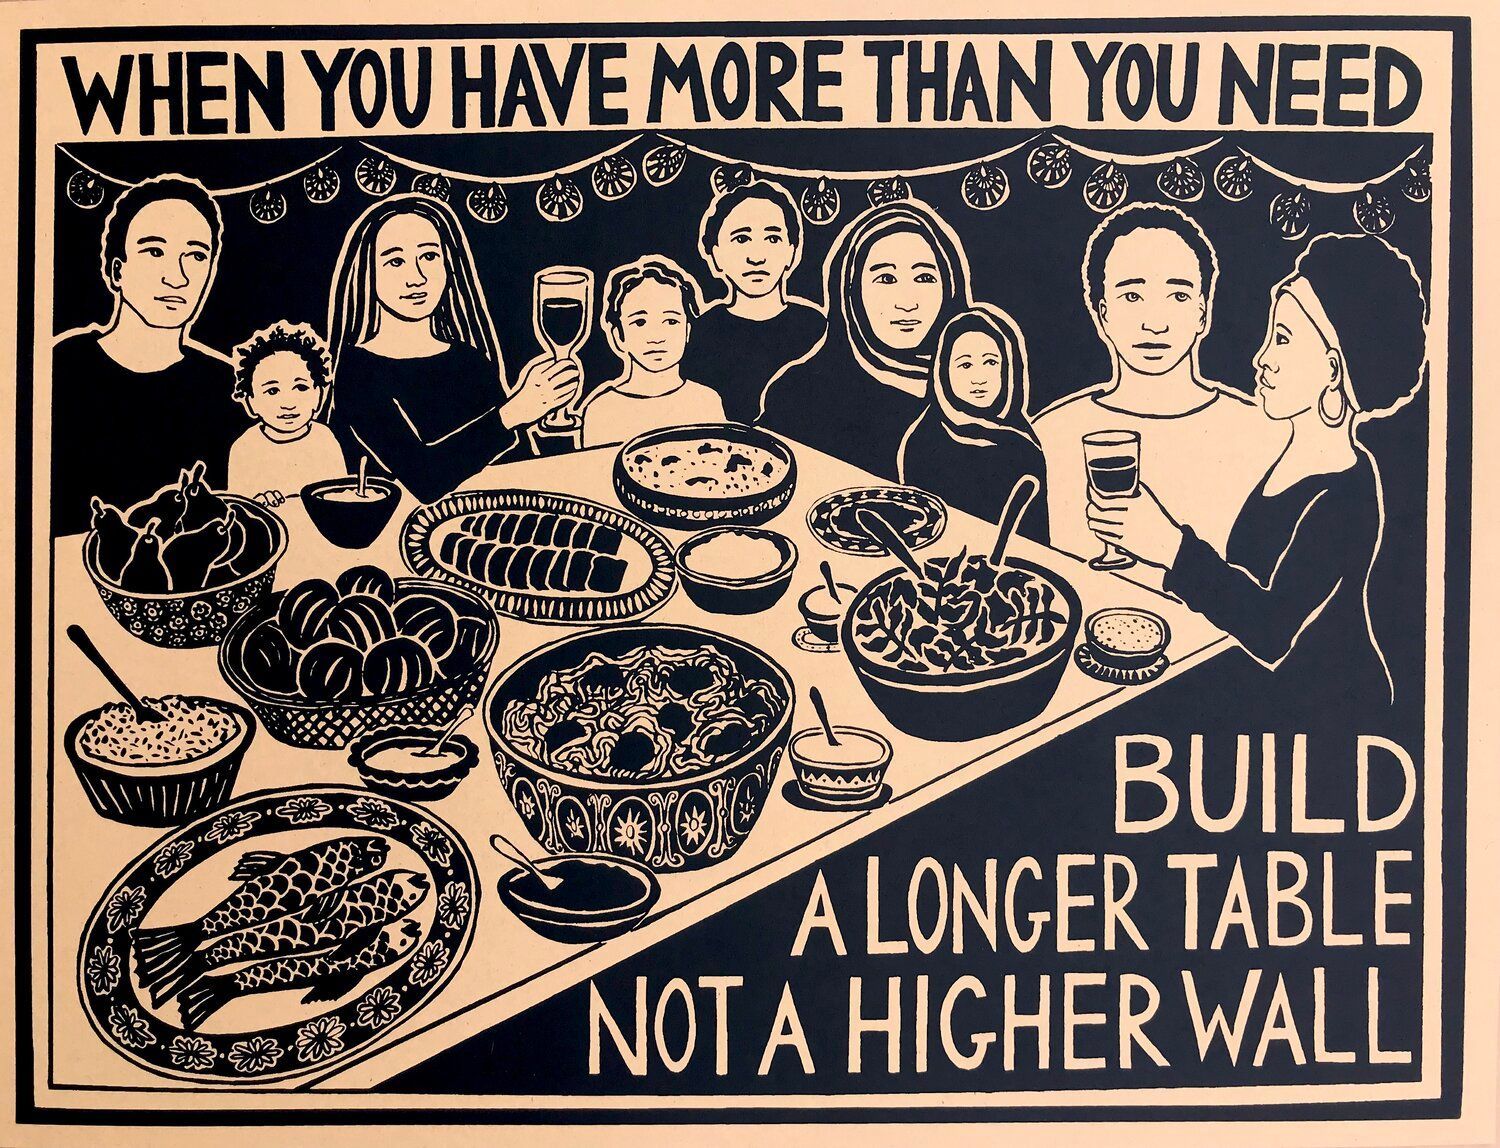 An image of people at a dining table. The text reads 